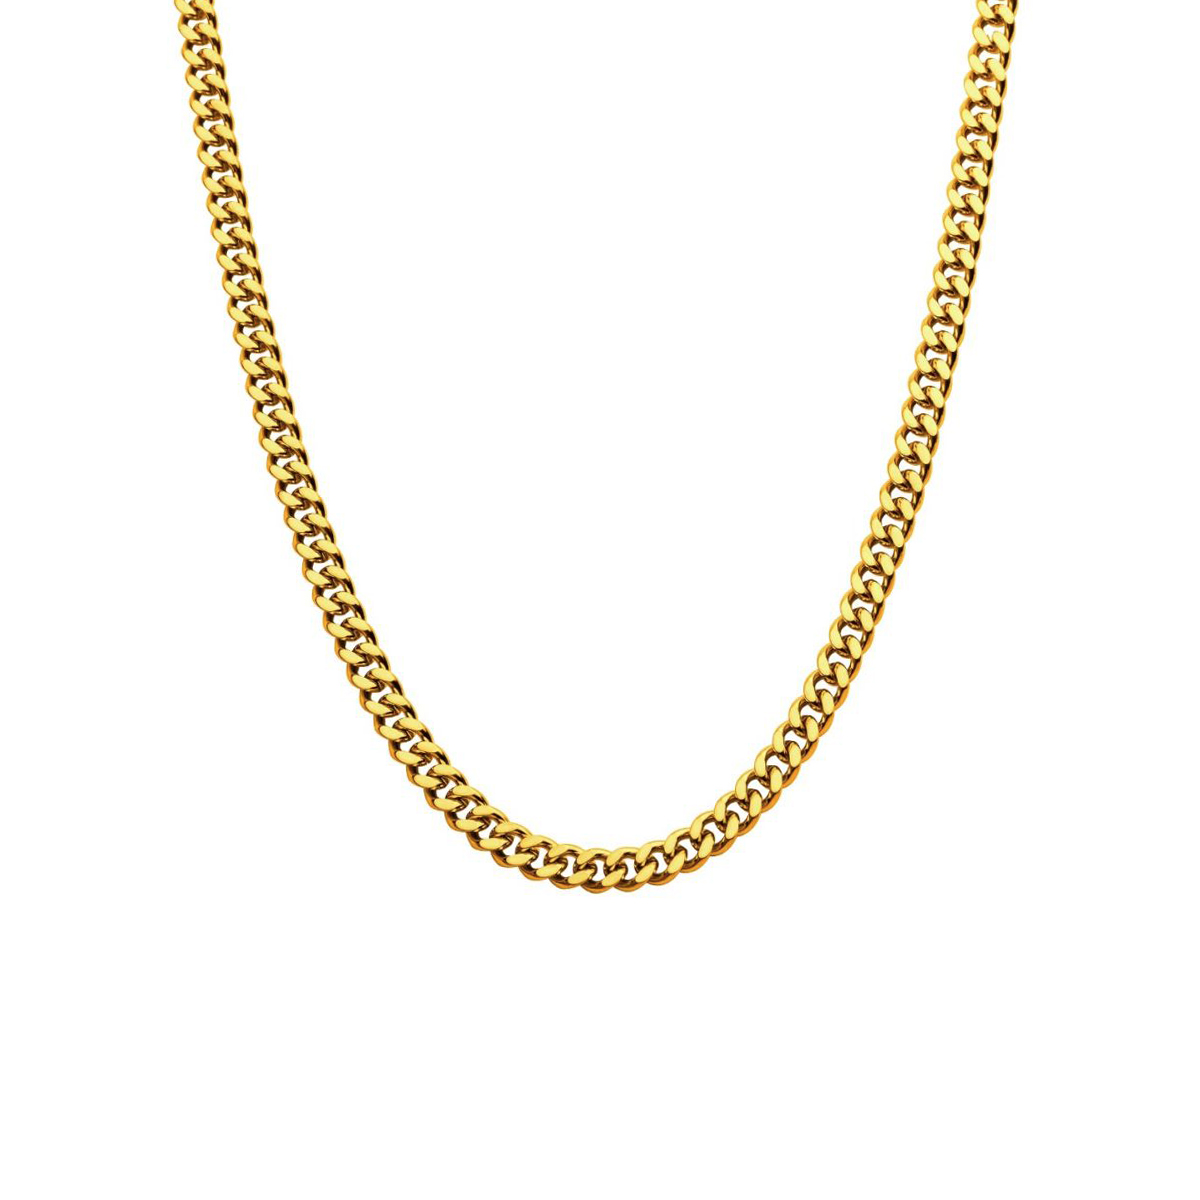 Stainless Steel 20" inch 4MM Diamond Cut Chain